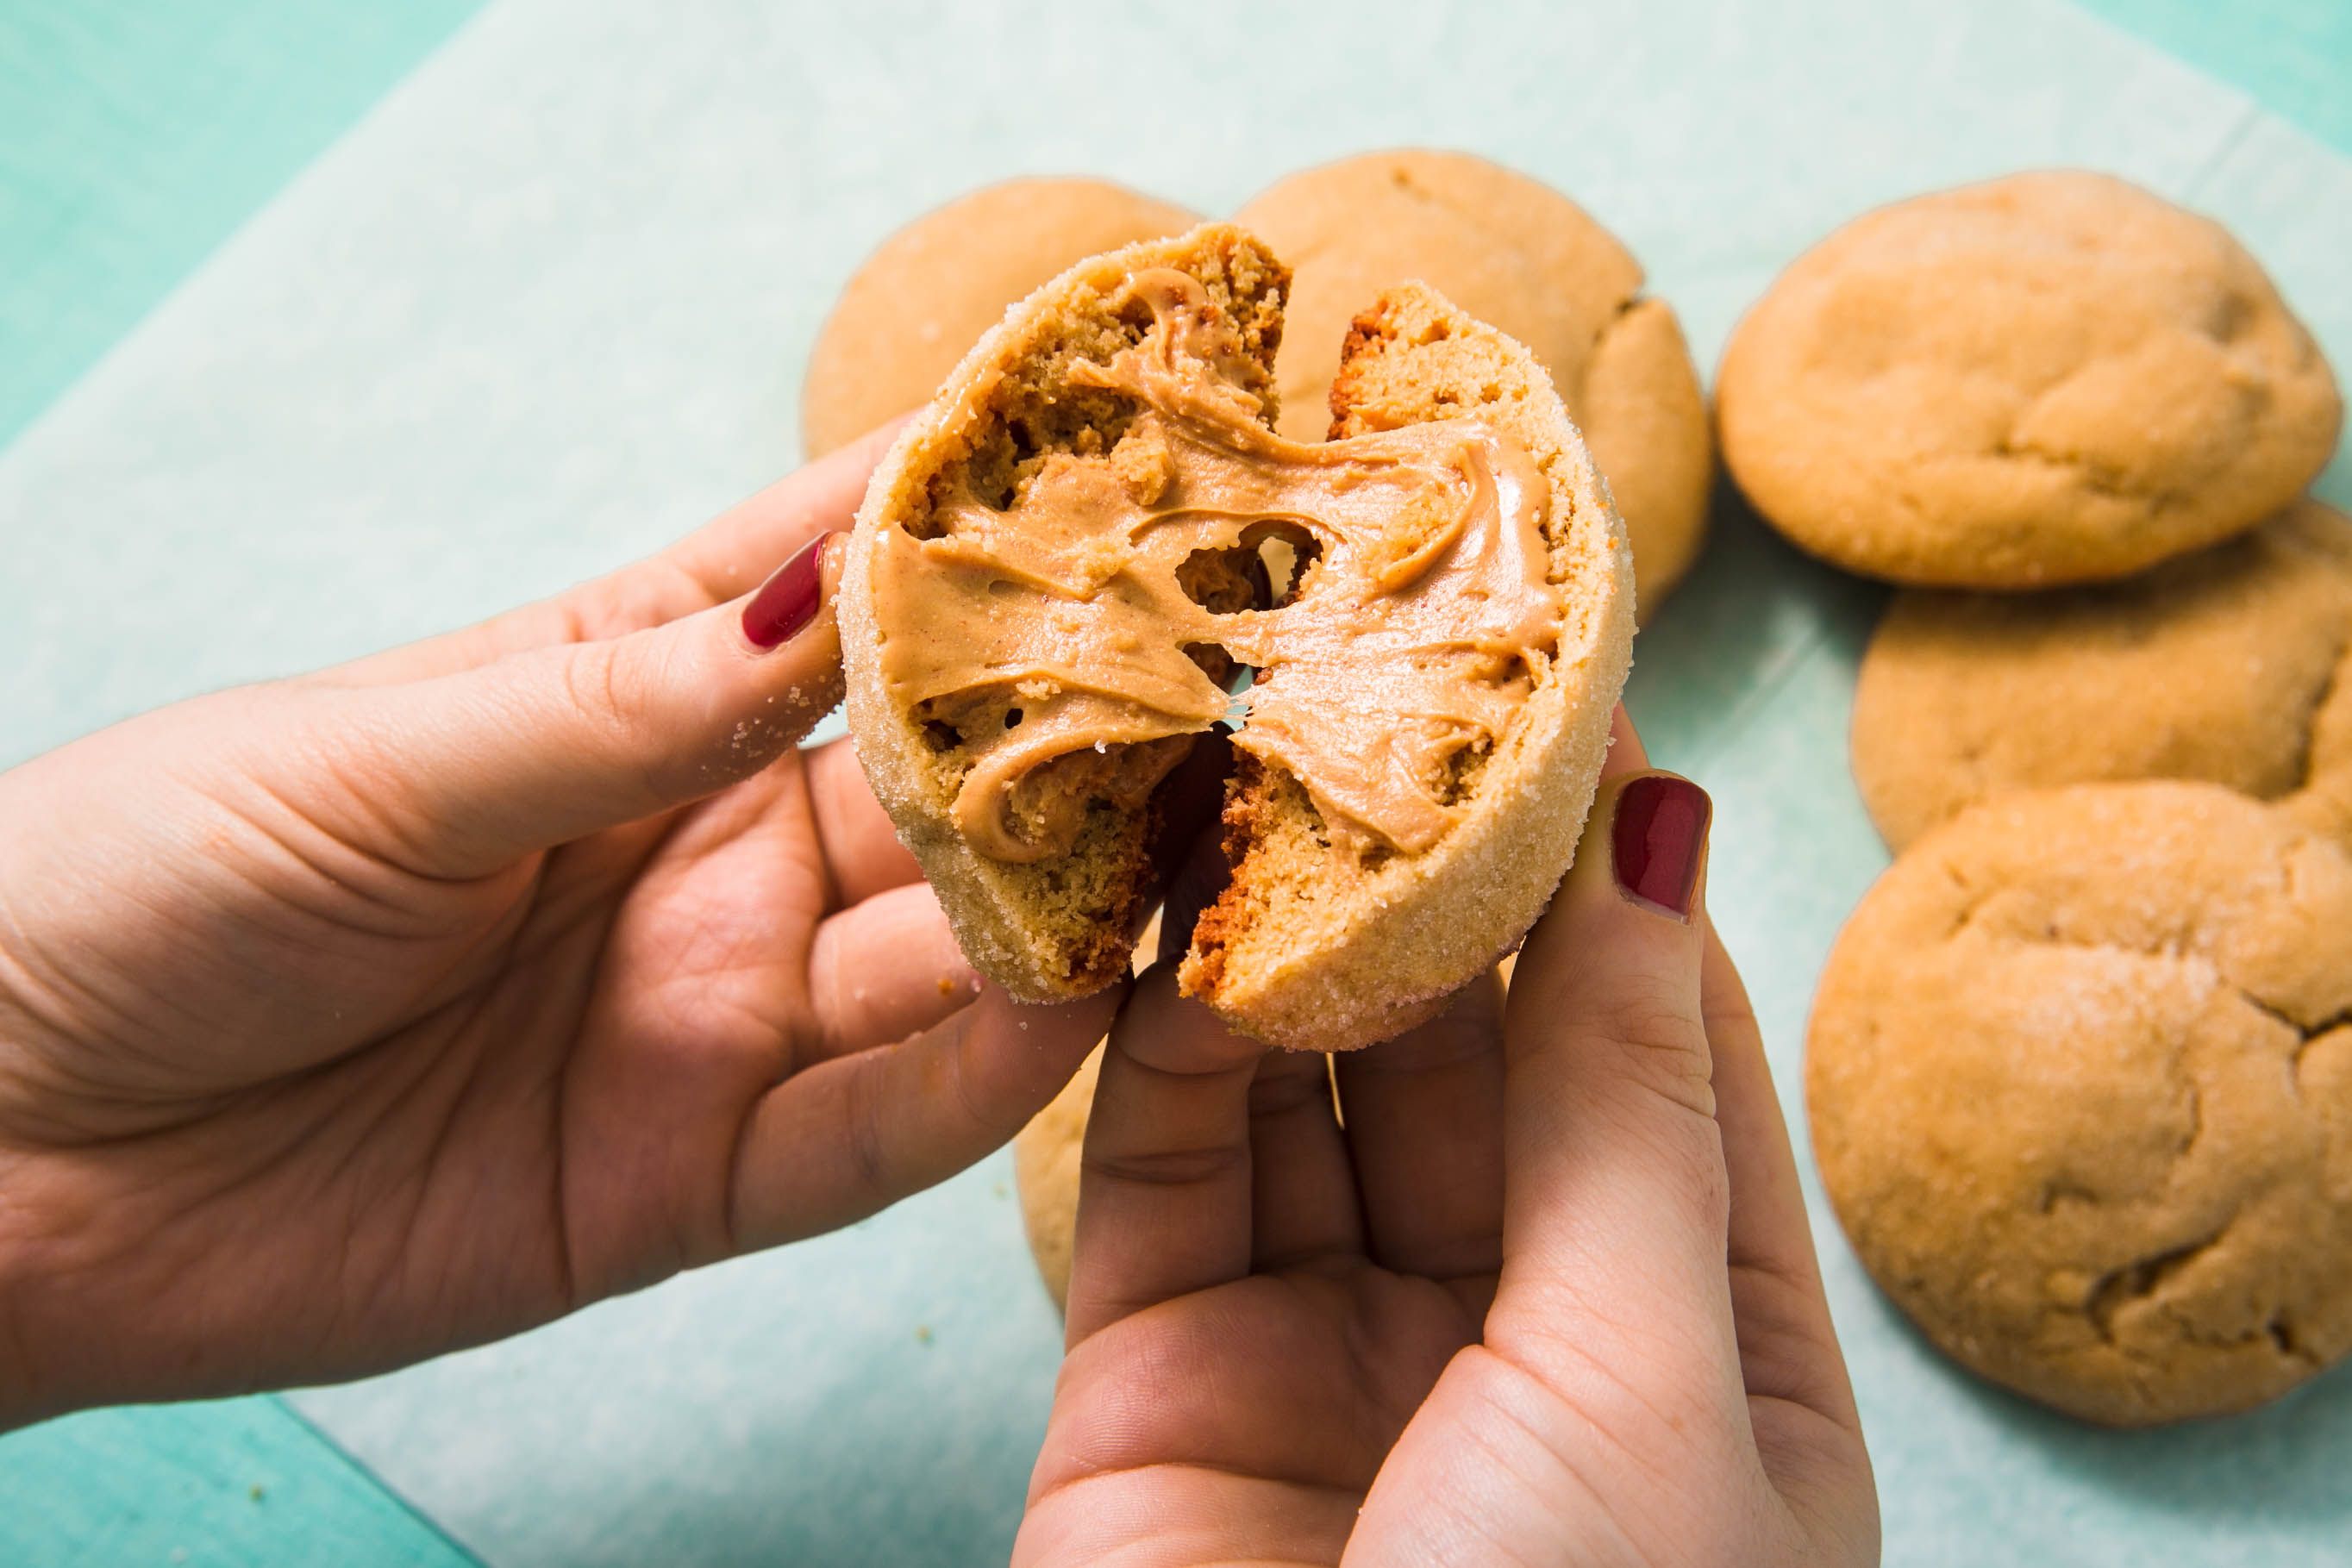 Best Peanut Butter Stuffed Cookies How To Make Peanut Butter Stuffed Cookies